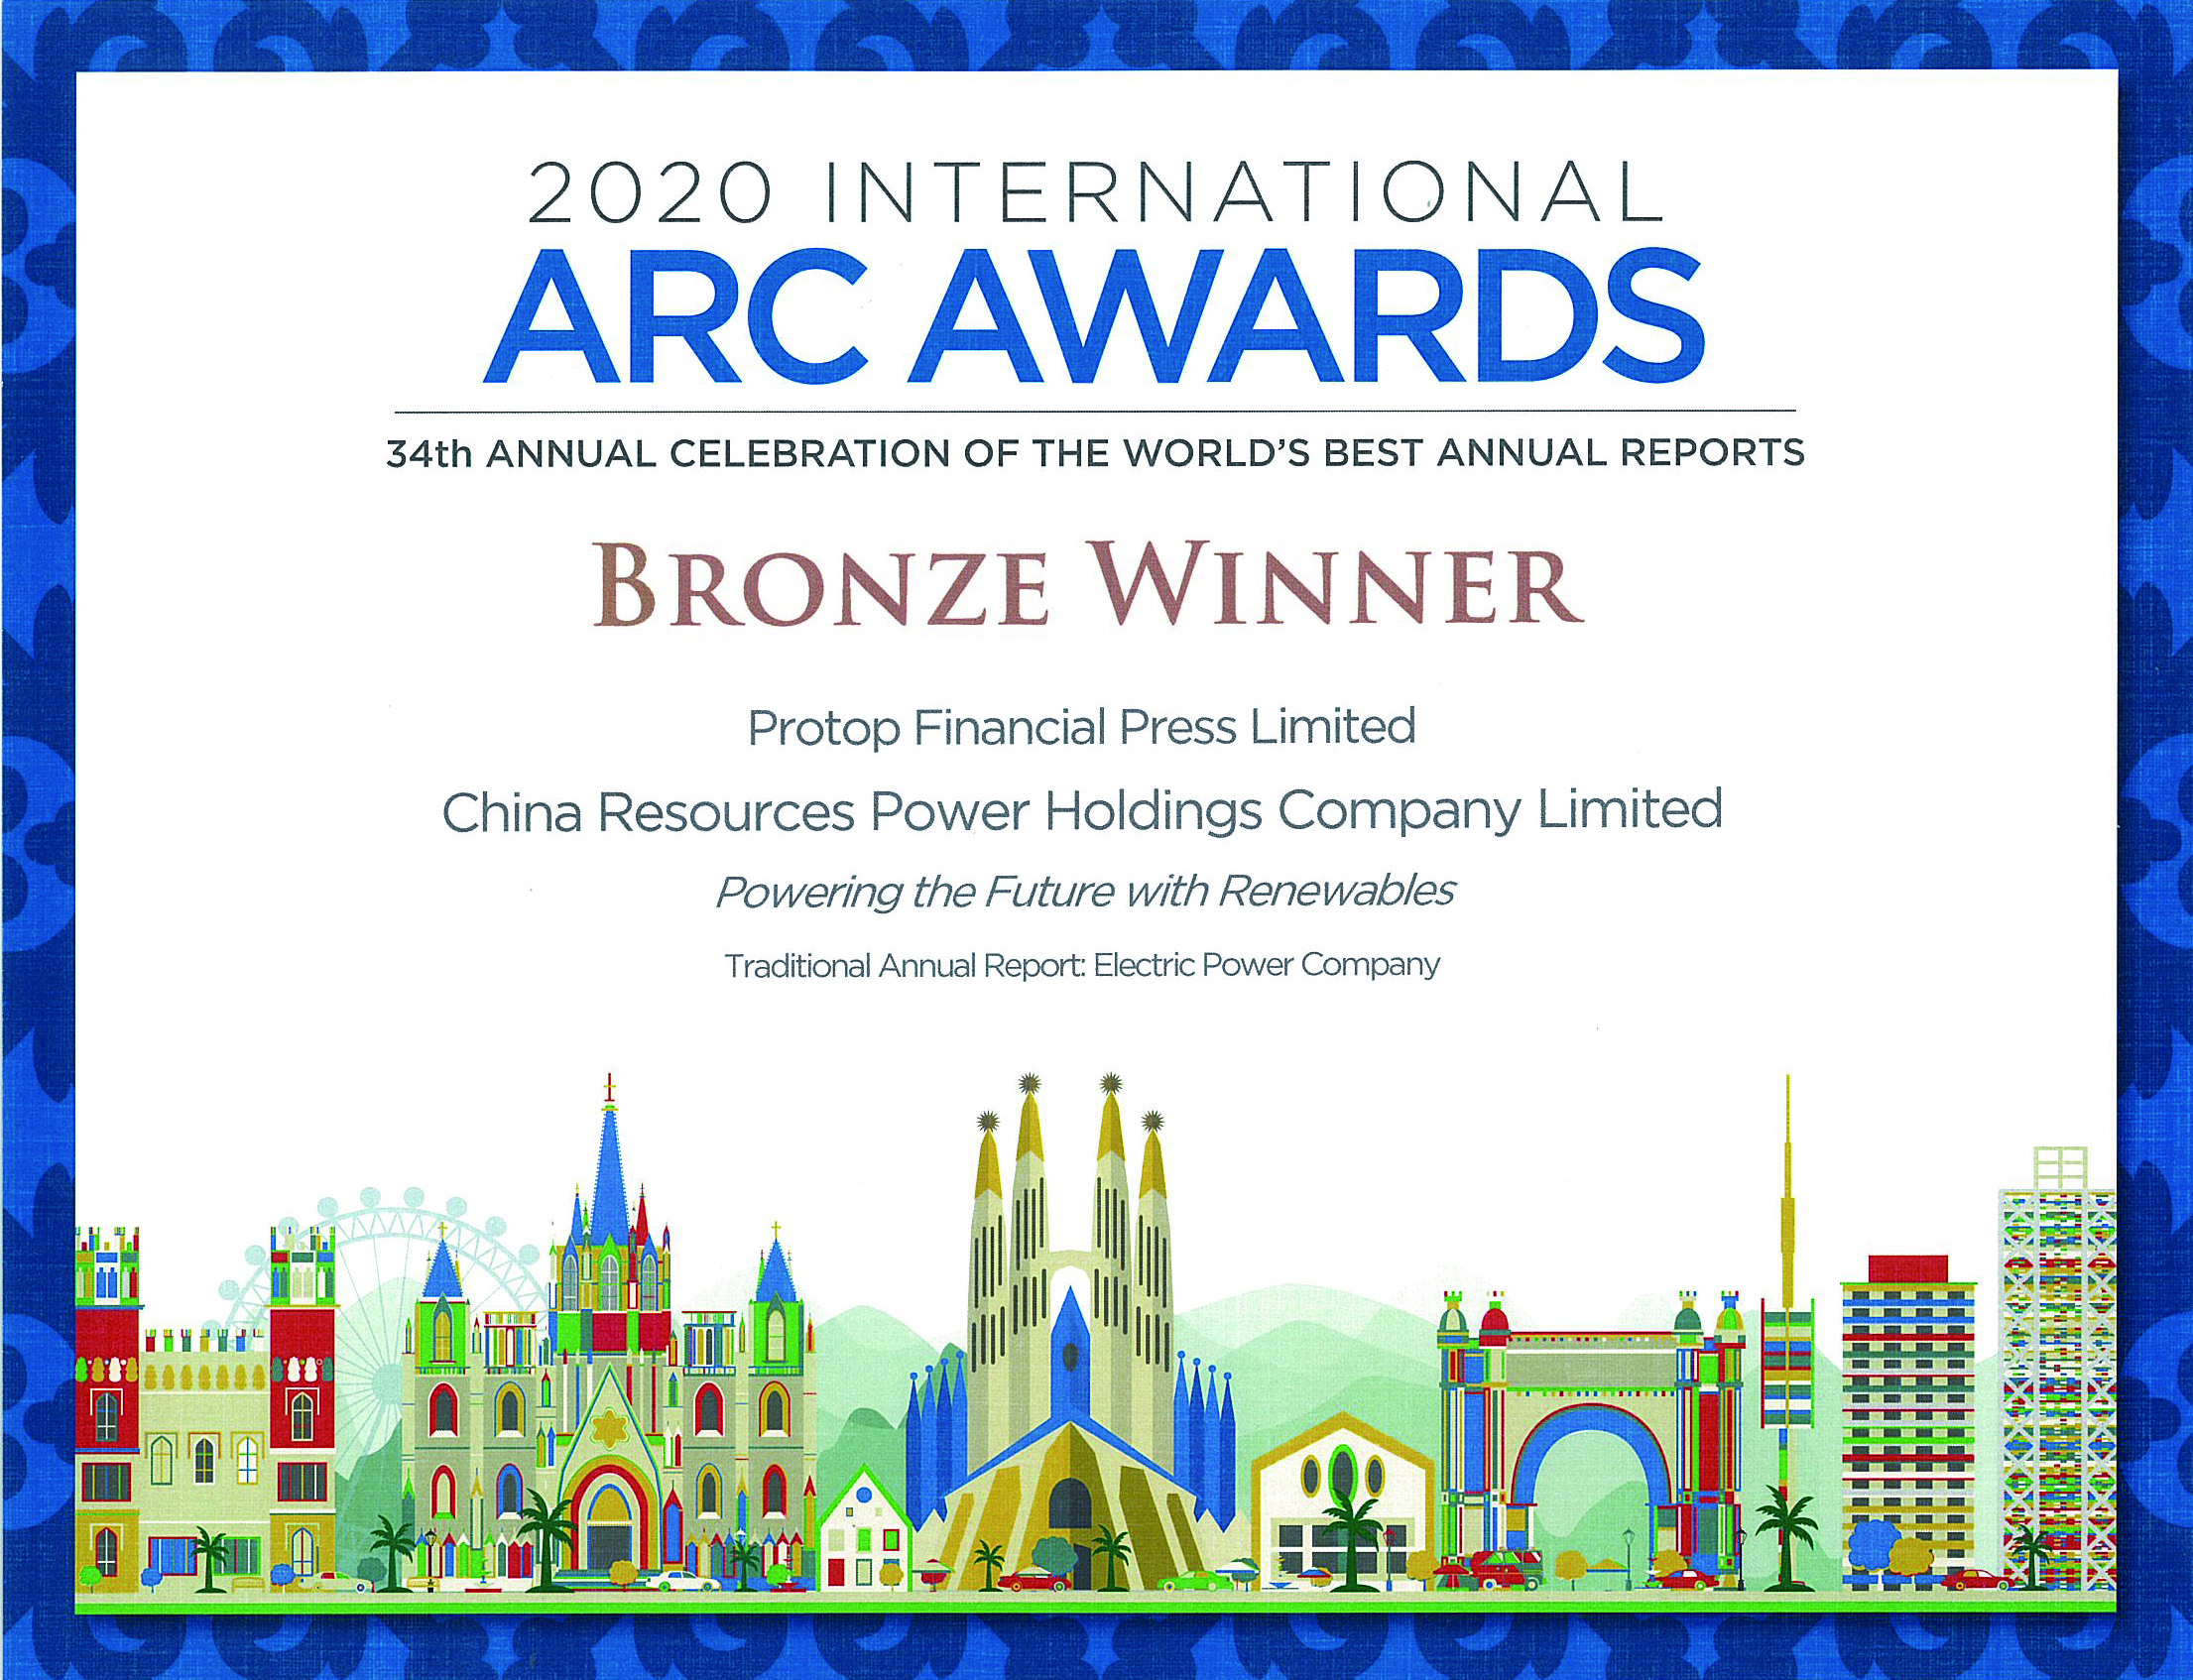 China Resources Power Holdings Company Limited 2020 Bronze Award